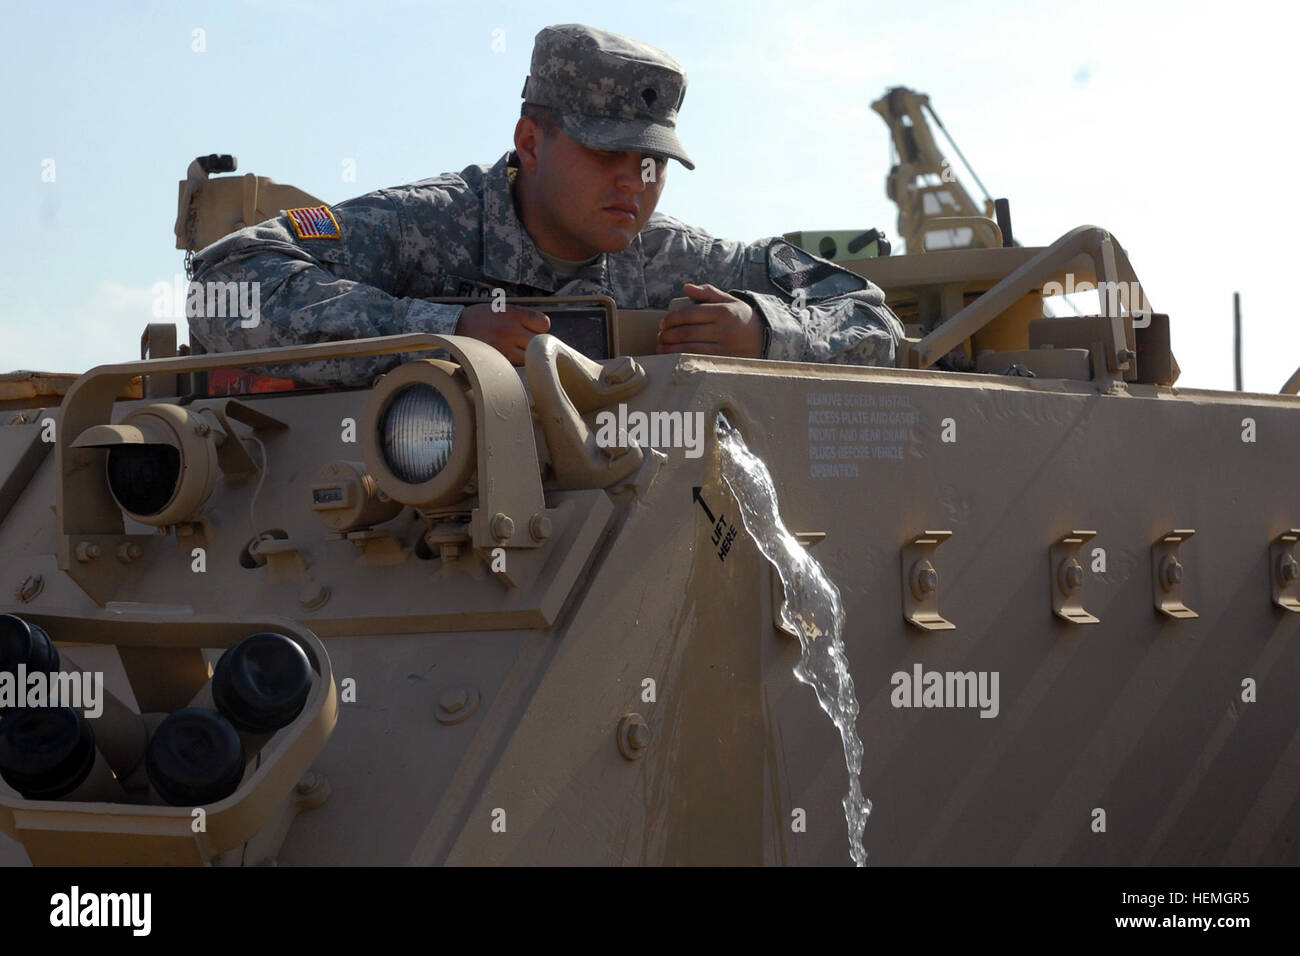 Spc. Fredericko Flores, a wheeled vehicle mechanic assigned to Headquarters and Headquarters Company, 1st Brigade Special Troops Battalion, 1st Brigade Combat Team, 1st Cavalry Division, drains excess water from the engine compartment of an M113 Armored Personnel Carrier using a bilge pump April 15 at Fort Hood, Texas. The excess water was found while conducting preventive maintenance checks and services. (Photo by Sgt. John Couffer, 1st BCT, 1st Cavalry Division Public Affairs) A soldier%%%%%%%%E2%%%%%%%%80%%%%%%%%99s passion, a vehicle%%%%%%%%E2%%%%%%%%80%%%%%%%%99s readiness 130415-A-EO505- Stock Photo